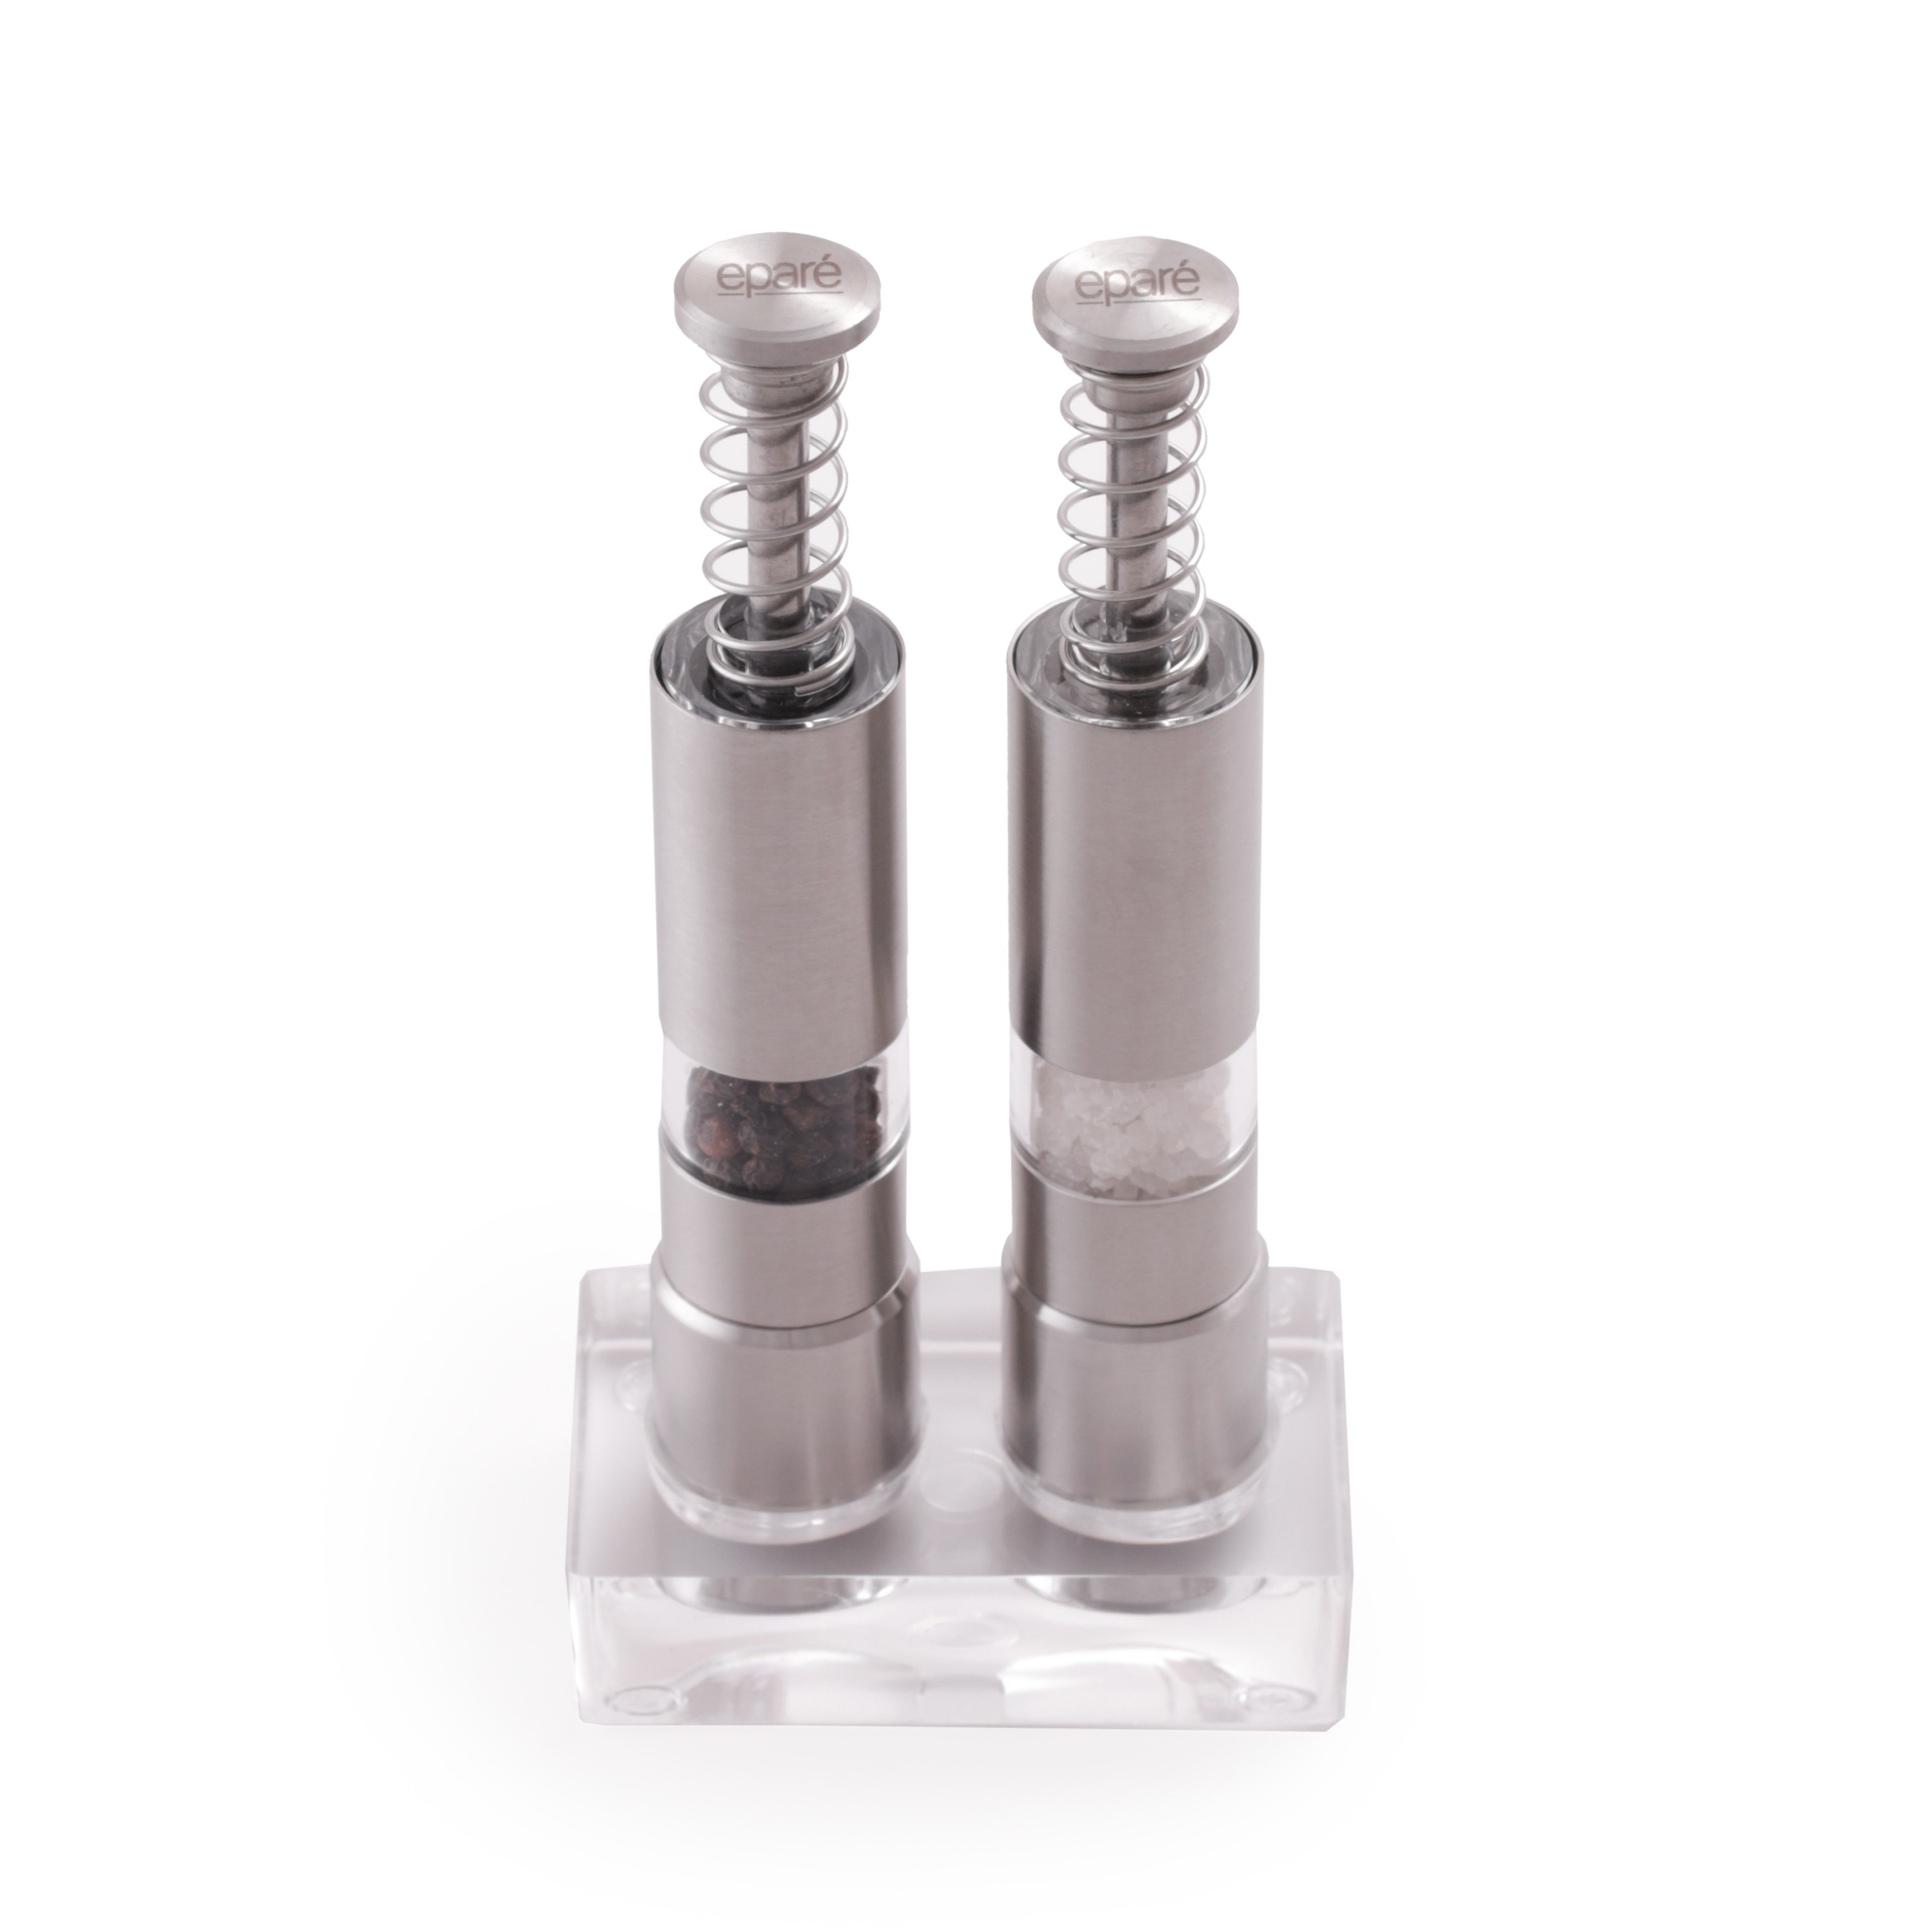 https://ak1.ostkcdn.com/images/products/9269221/Epare-Stainless-Steel-Salt-and-Pepper-Grinder-Set-7a904778-755b-444a-b808-8eb23fe0dbc2.jpg